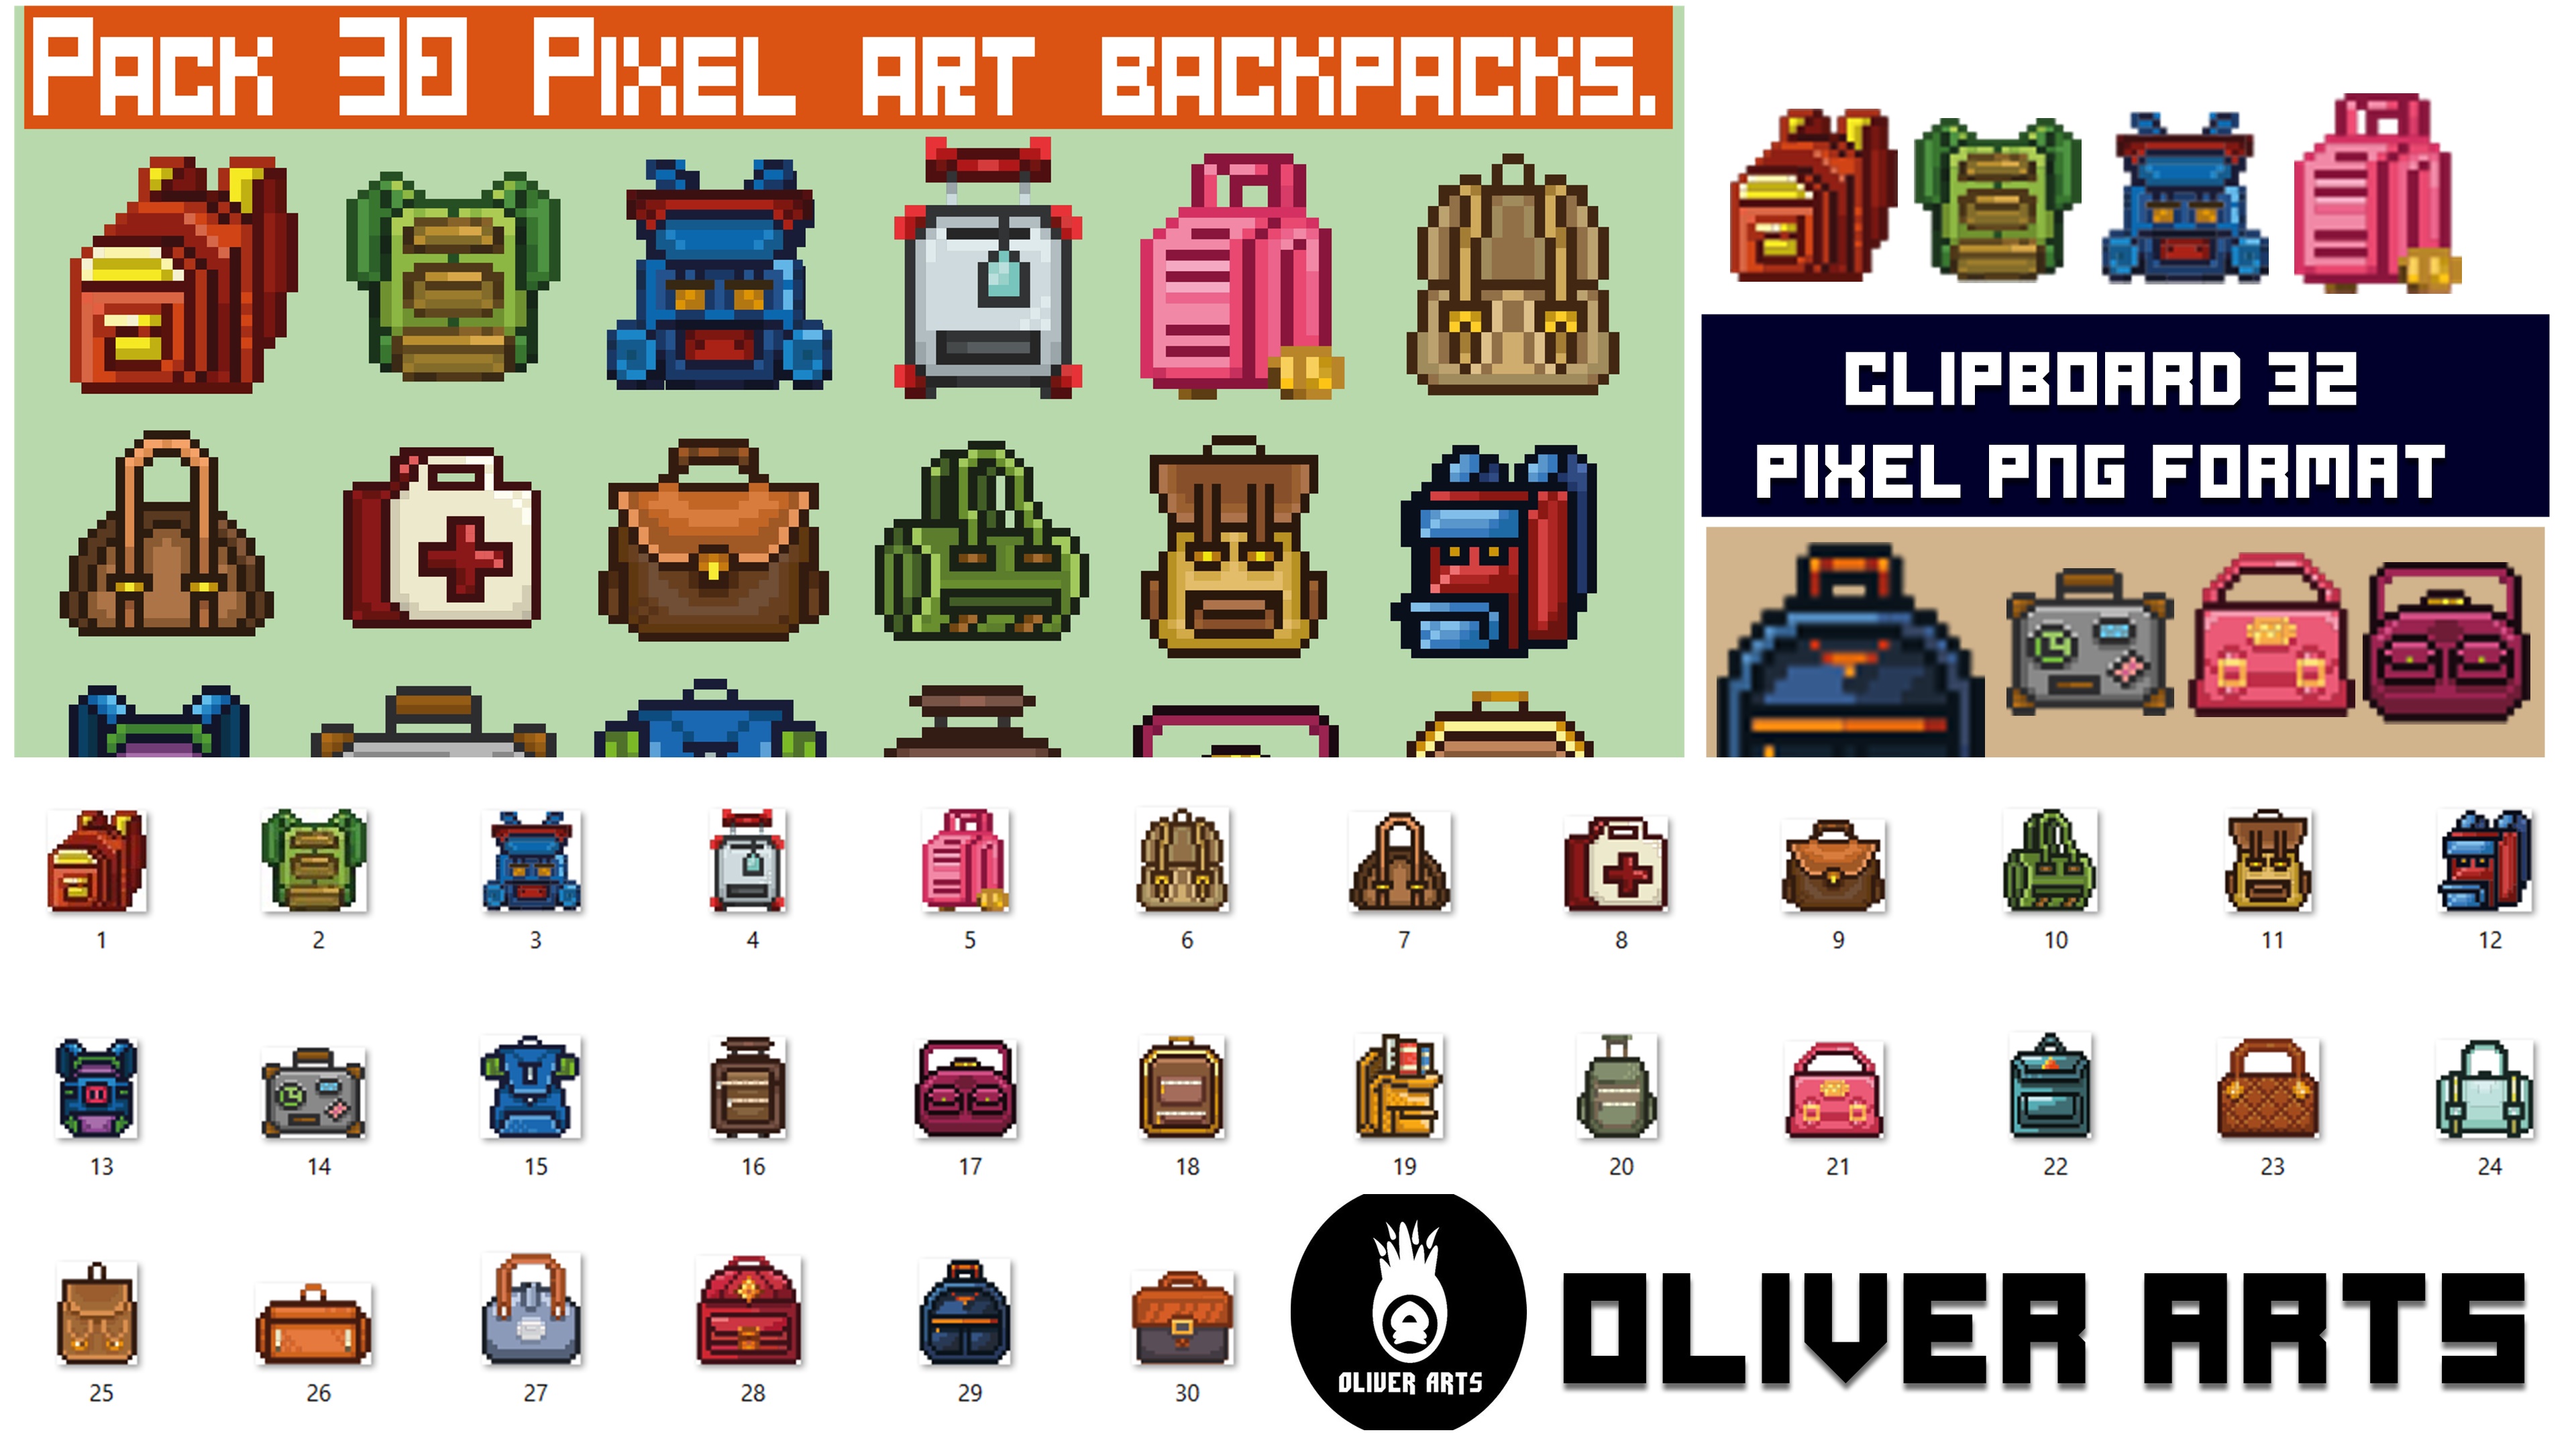 Pack of 32 backpack icons in vectorized pixel art format. by Oliver Design  Arts